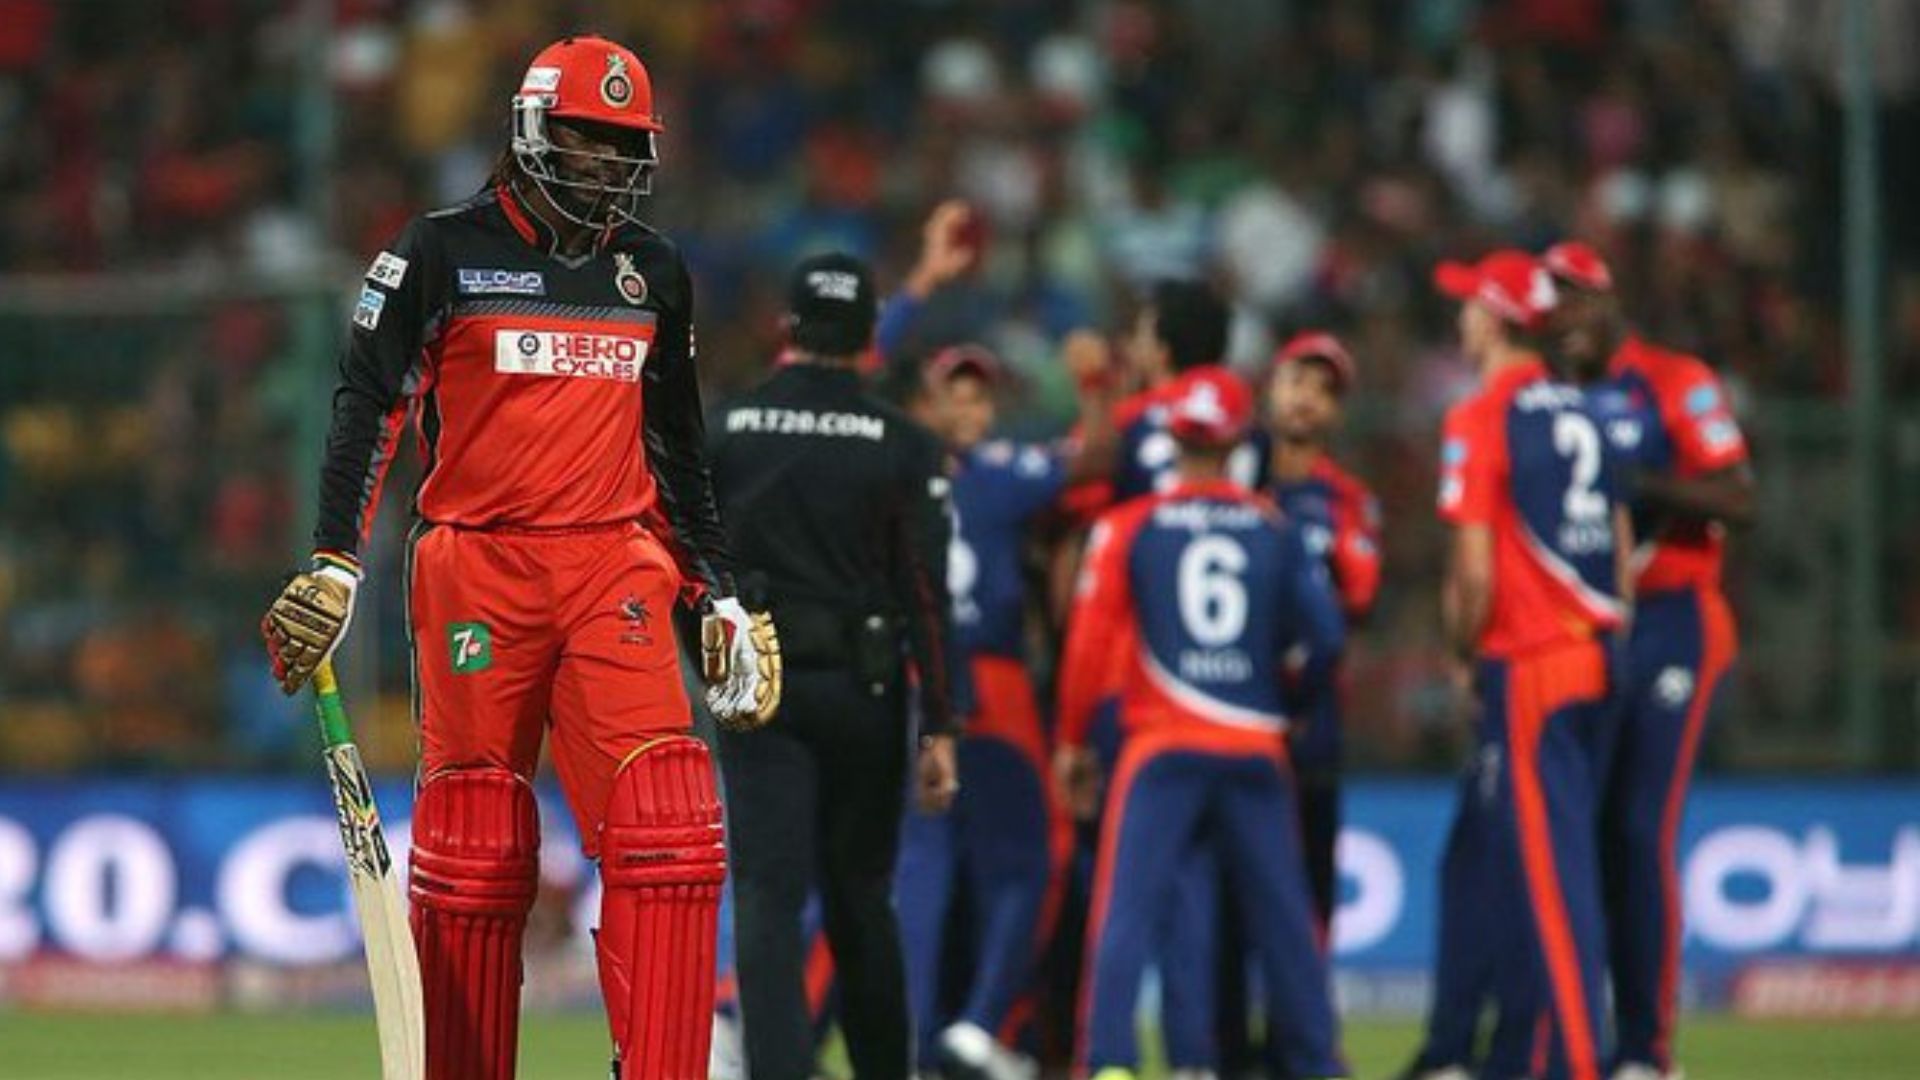 Chris Gayle was a prolific run scorer for the Royal Challengers Bangalore.